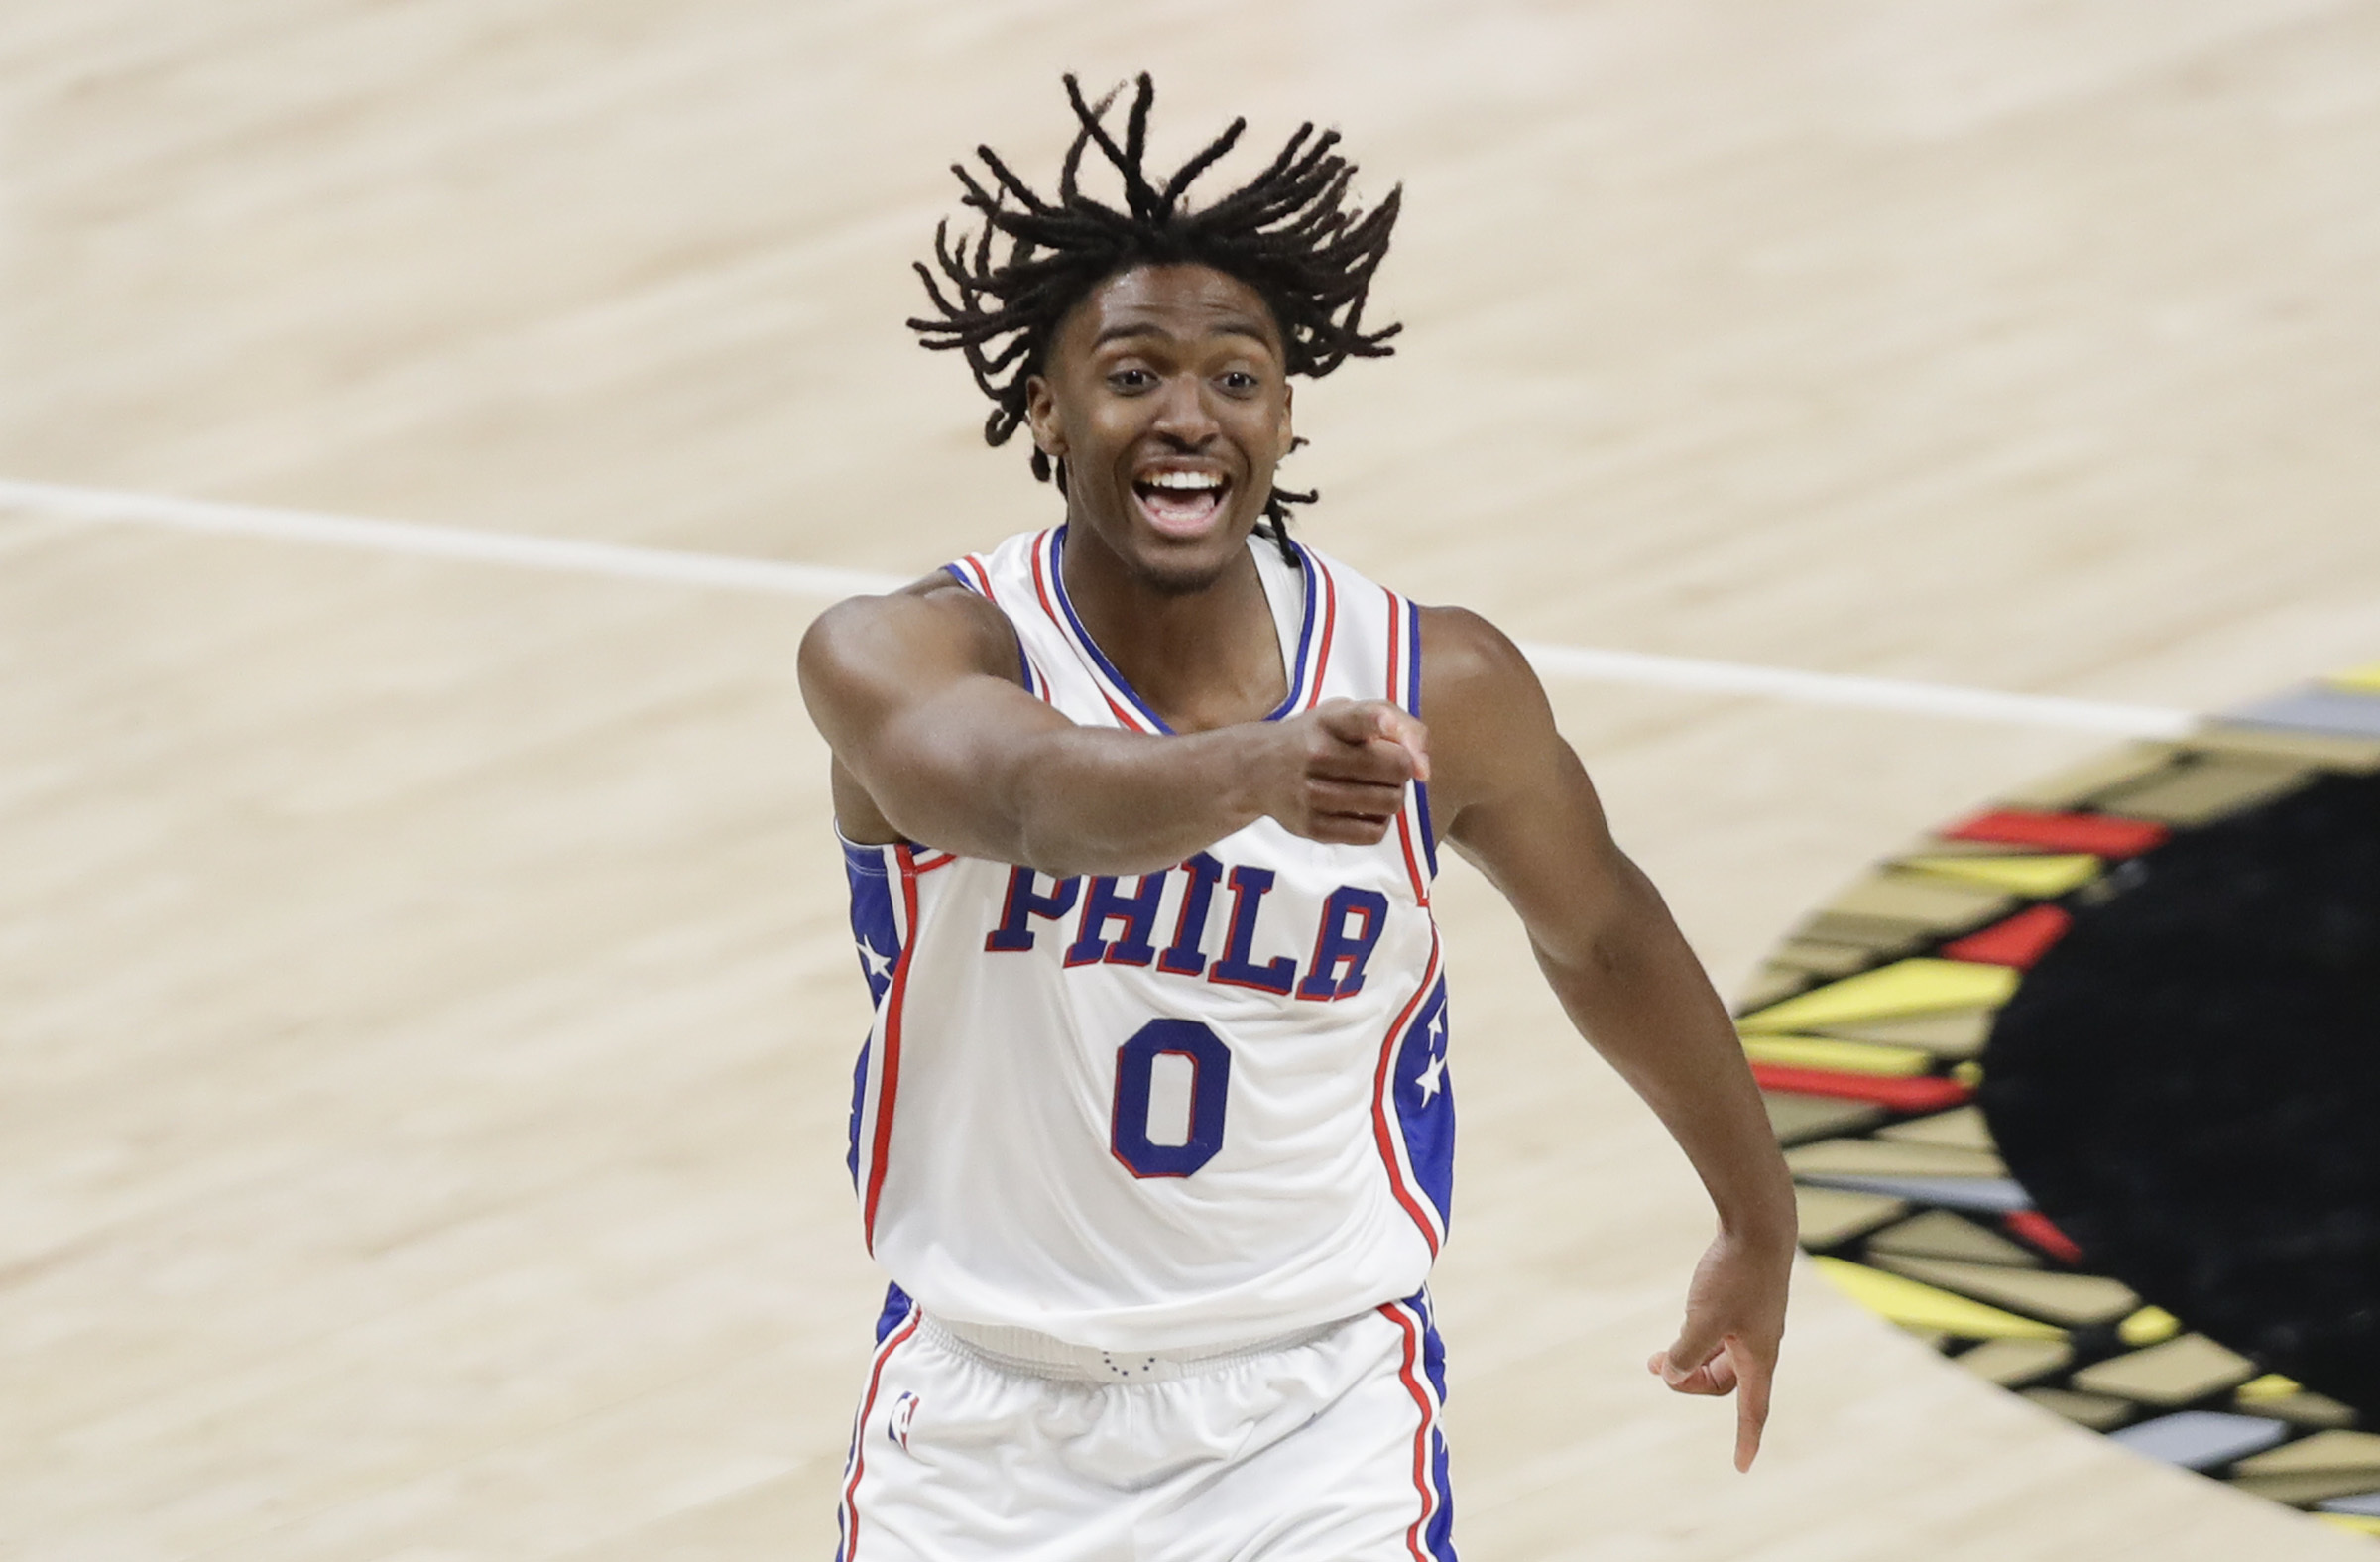 Sixers guard Shake Milton has return date in mind, but won't share it